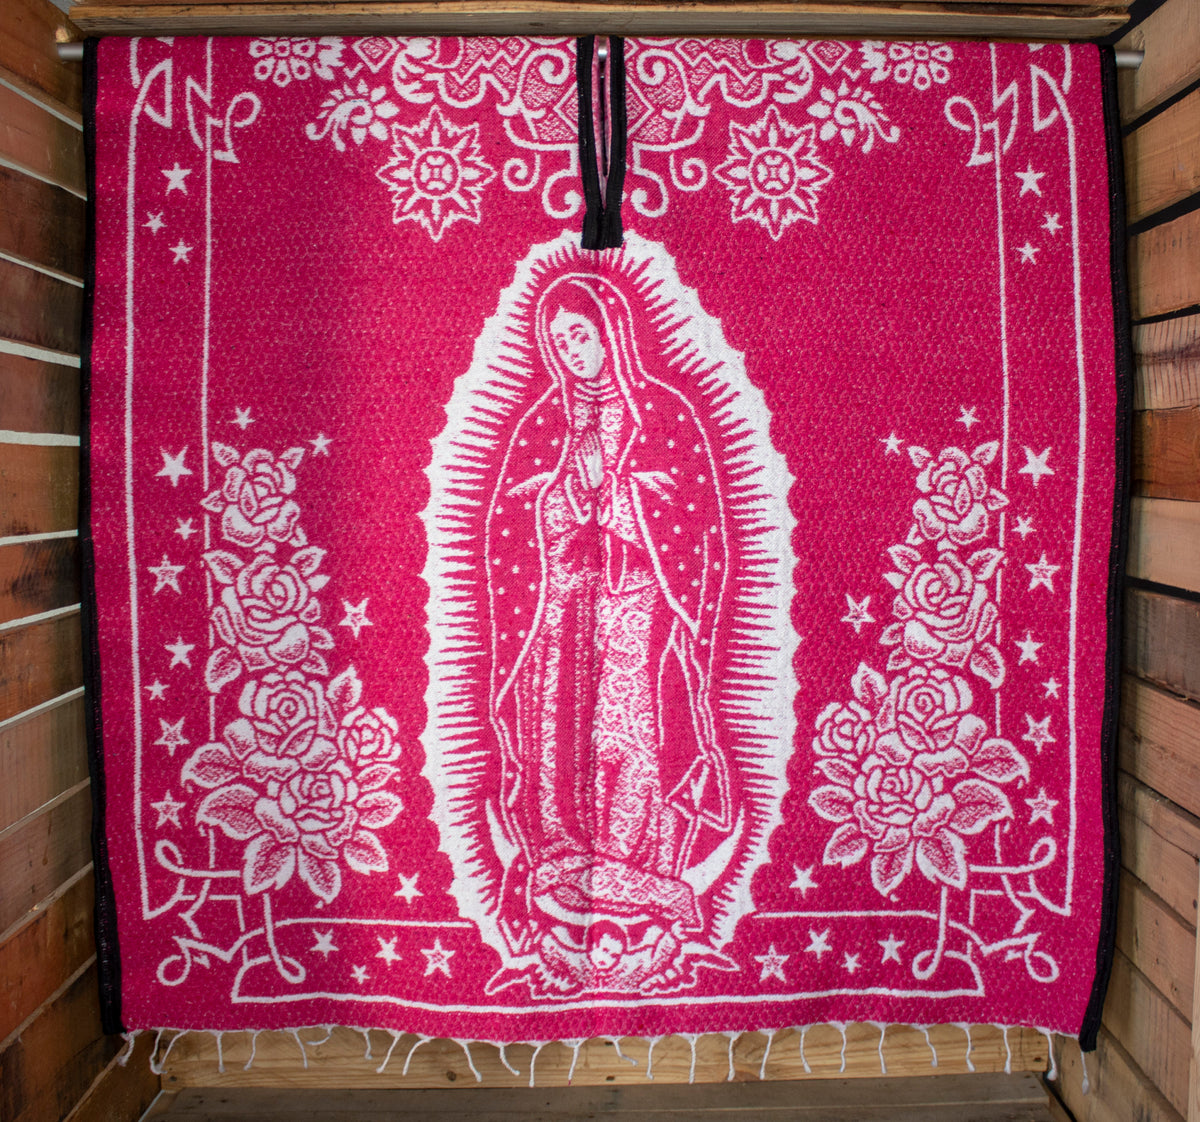 Mexico with Virgin Mary Patch - Sarape Sashes